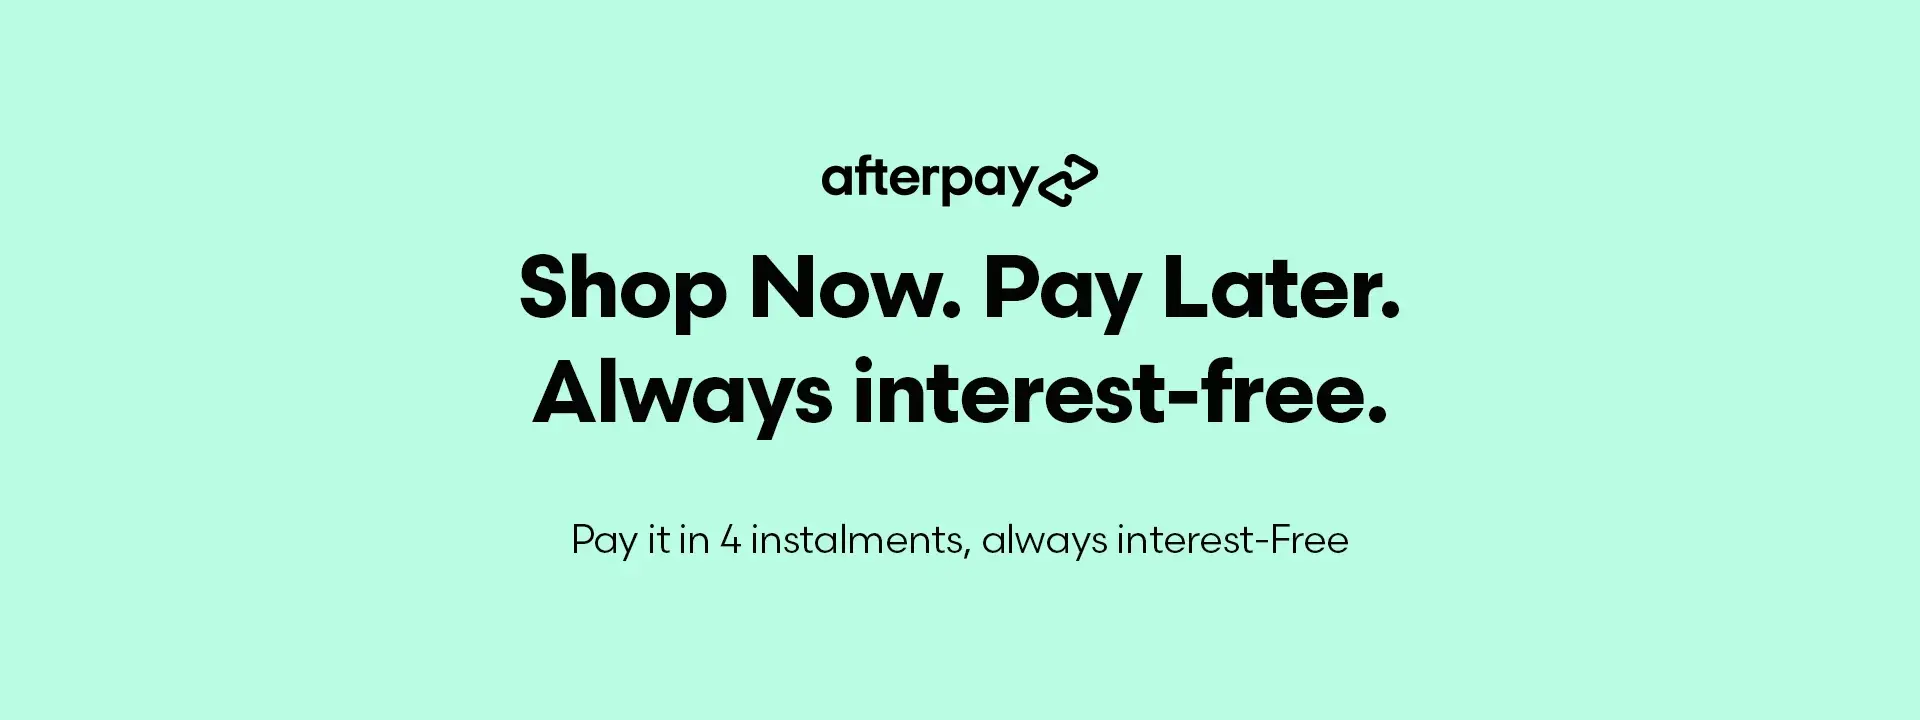 Afterpay-Hero 1920x720